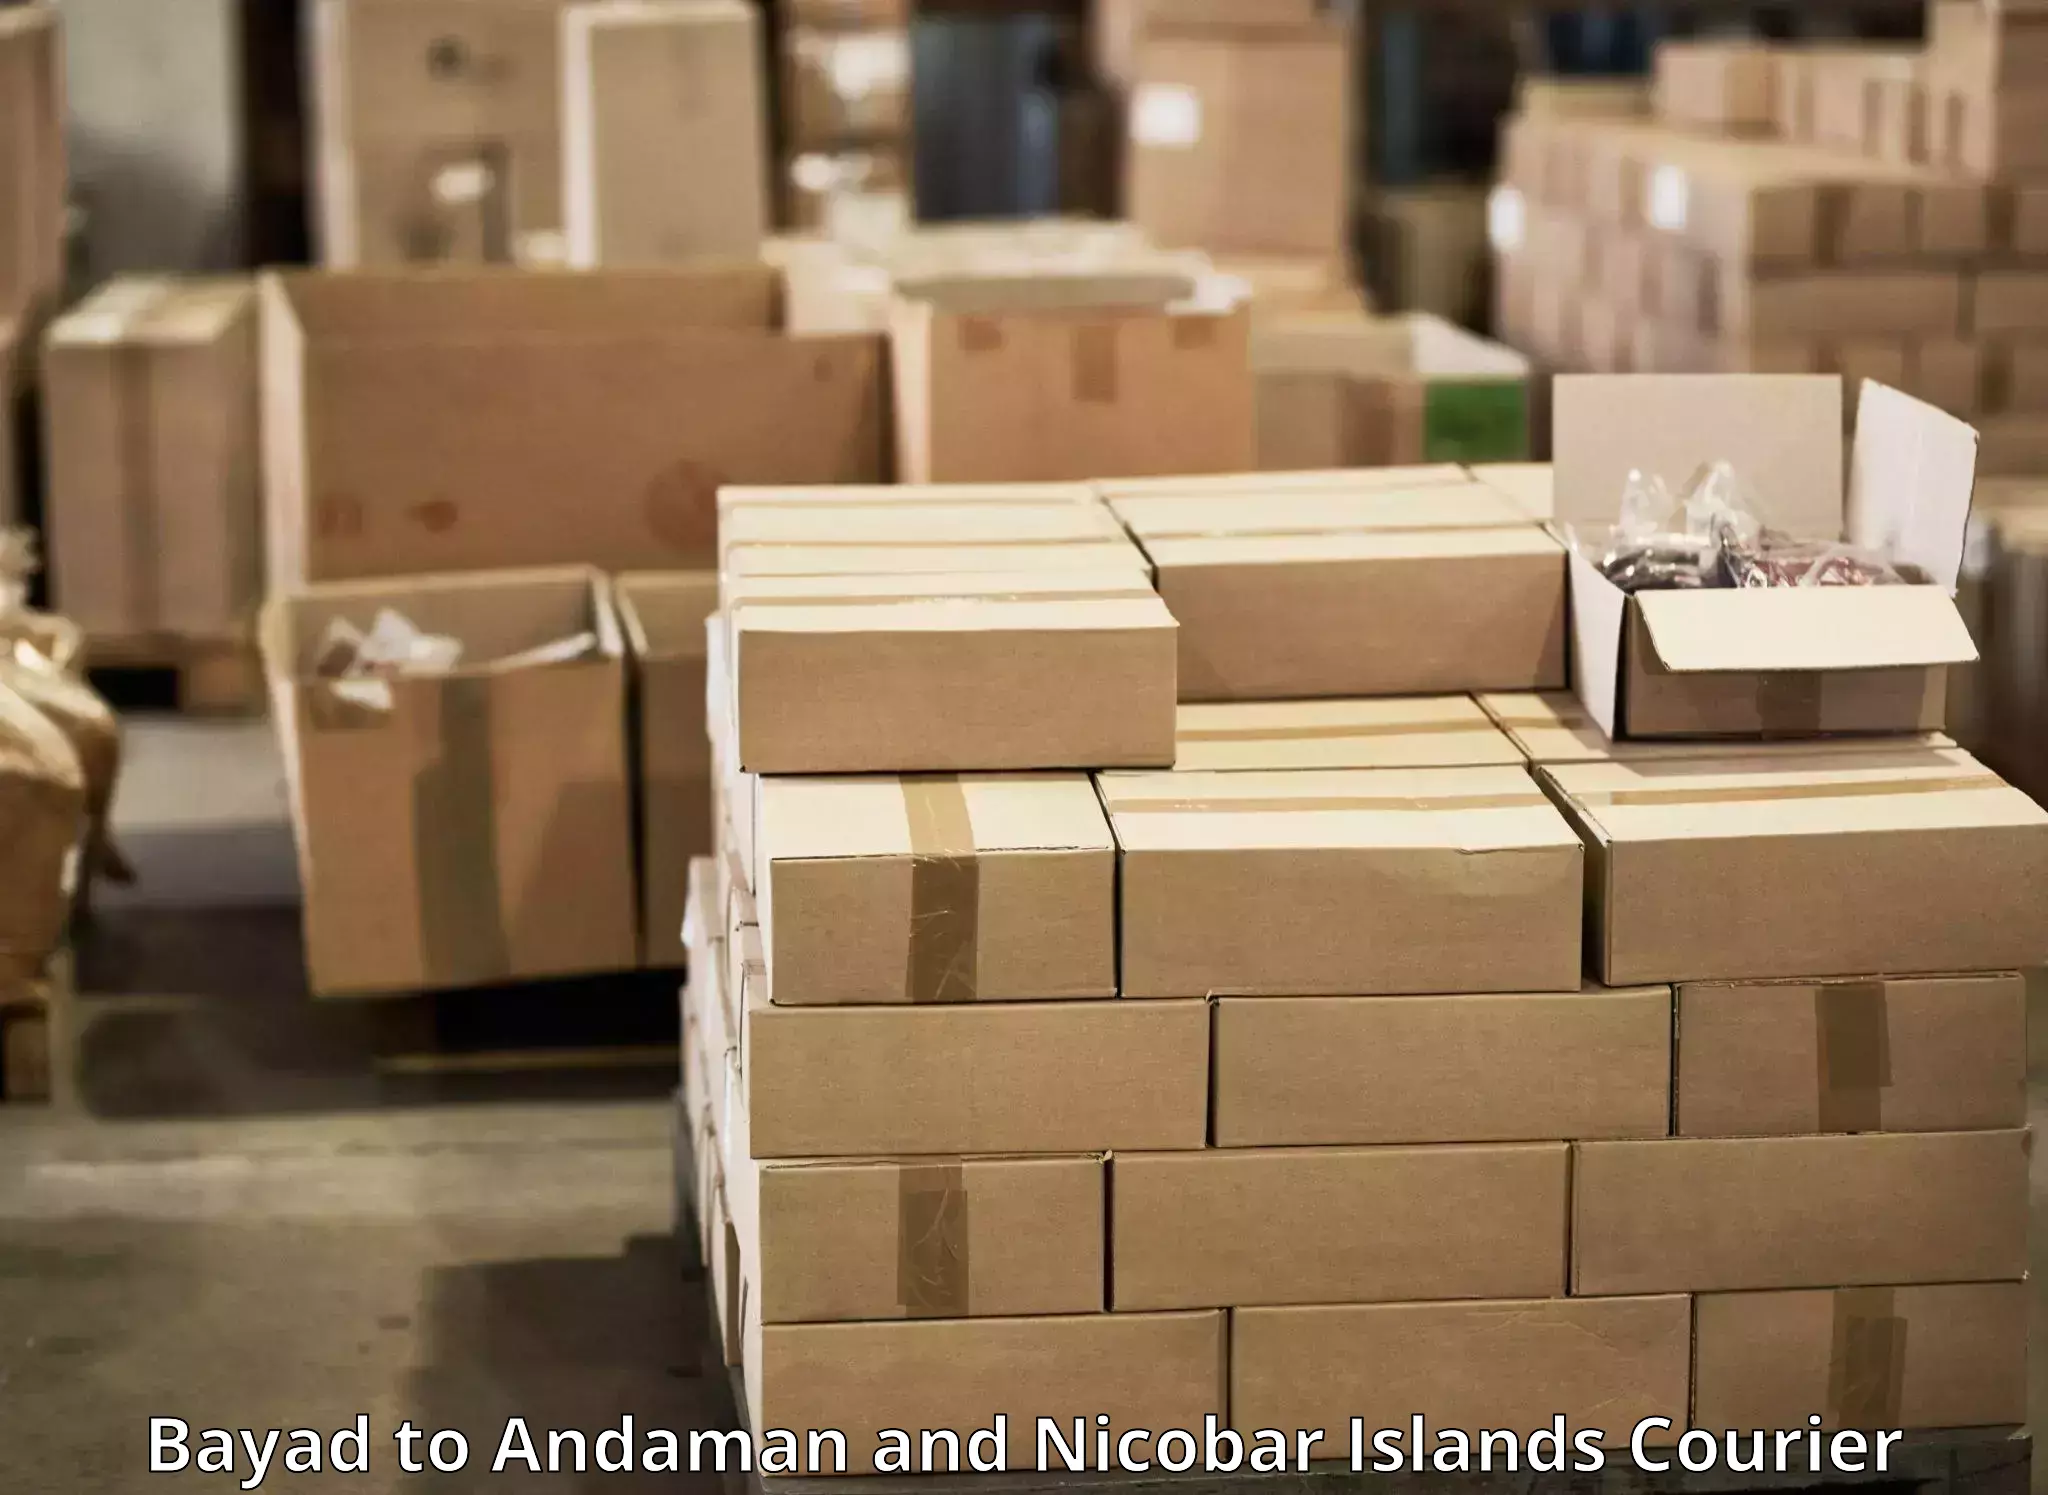 Round-the-clock parcel delivery Bayad to Andaman and Nicobar Islands